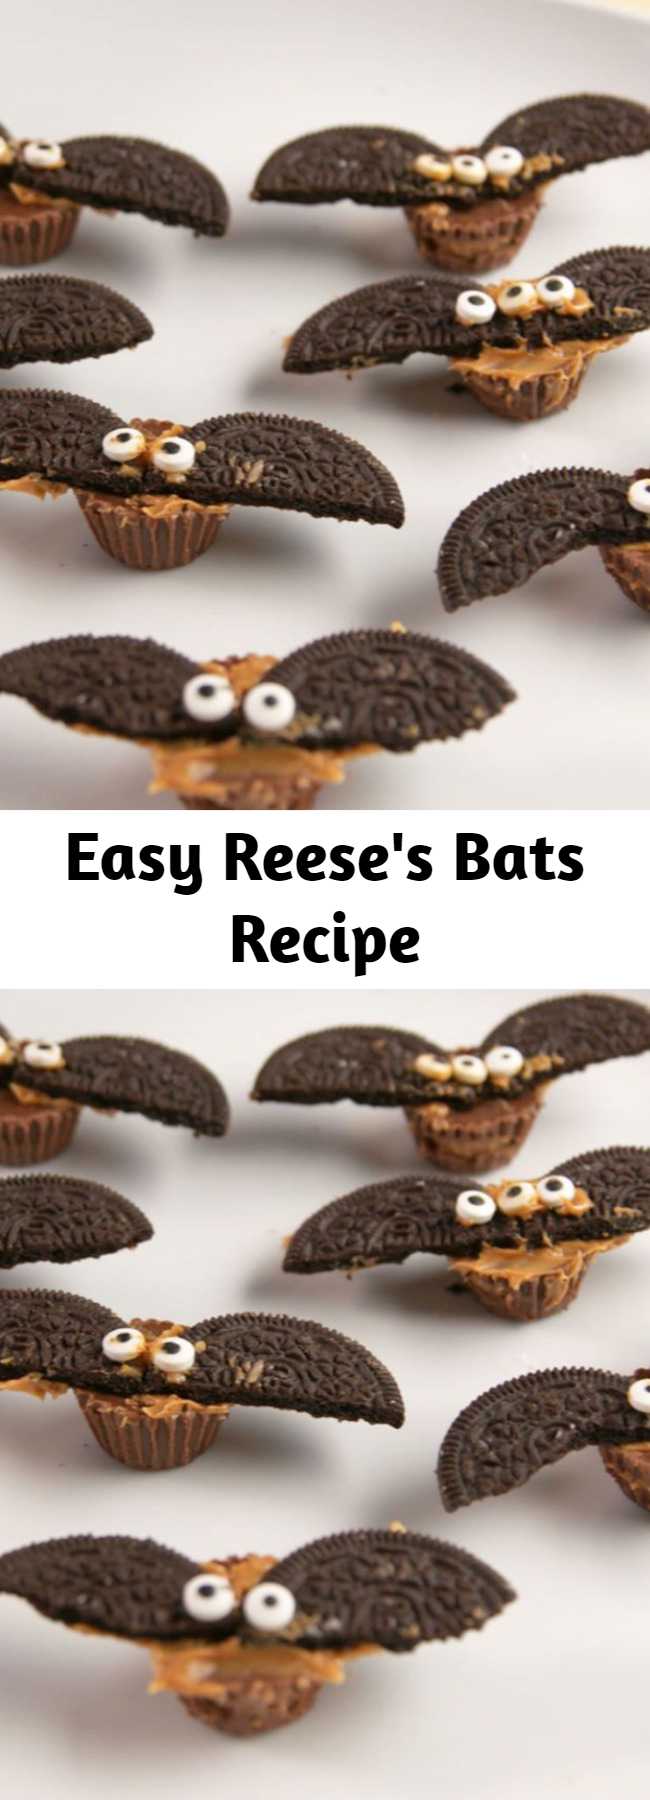 Easy Reese's Bats Recipe - These will fly away at your next Halloween party! #easy #recipe #reeses #bats #halloweenideas #halloween #halloweenfood #candy #chocolate #peanutbutter #oreo